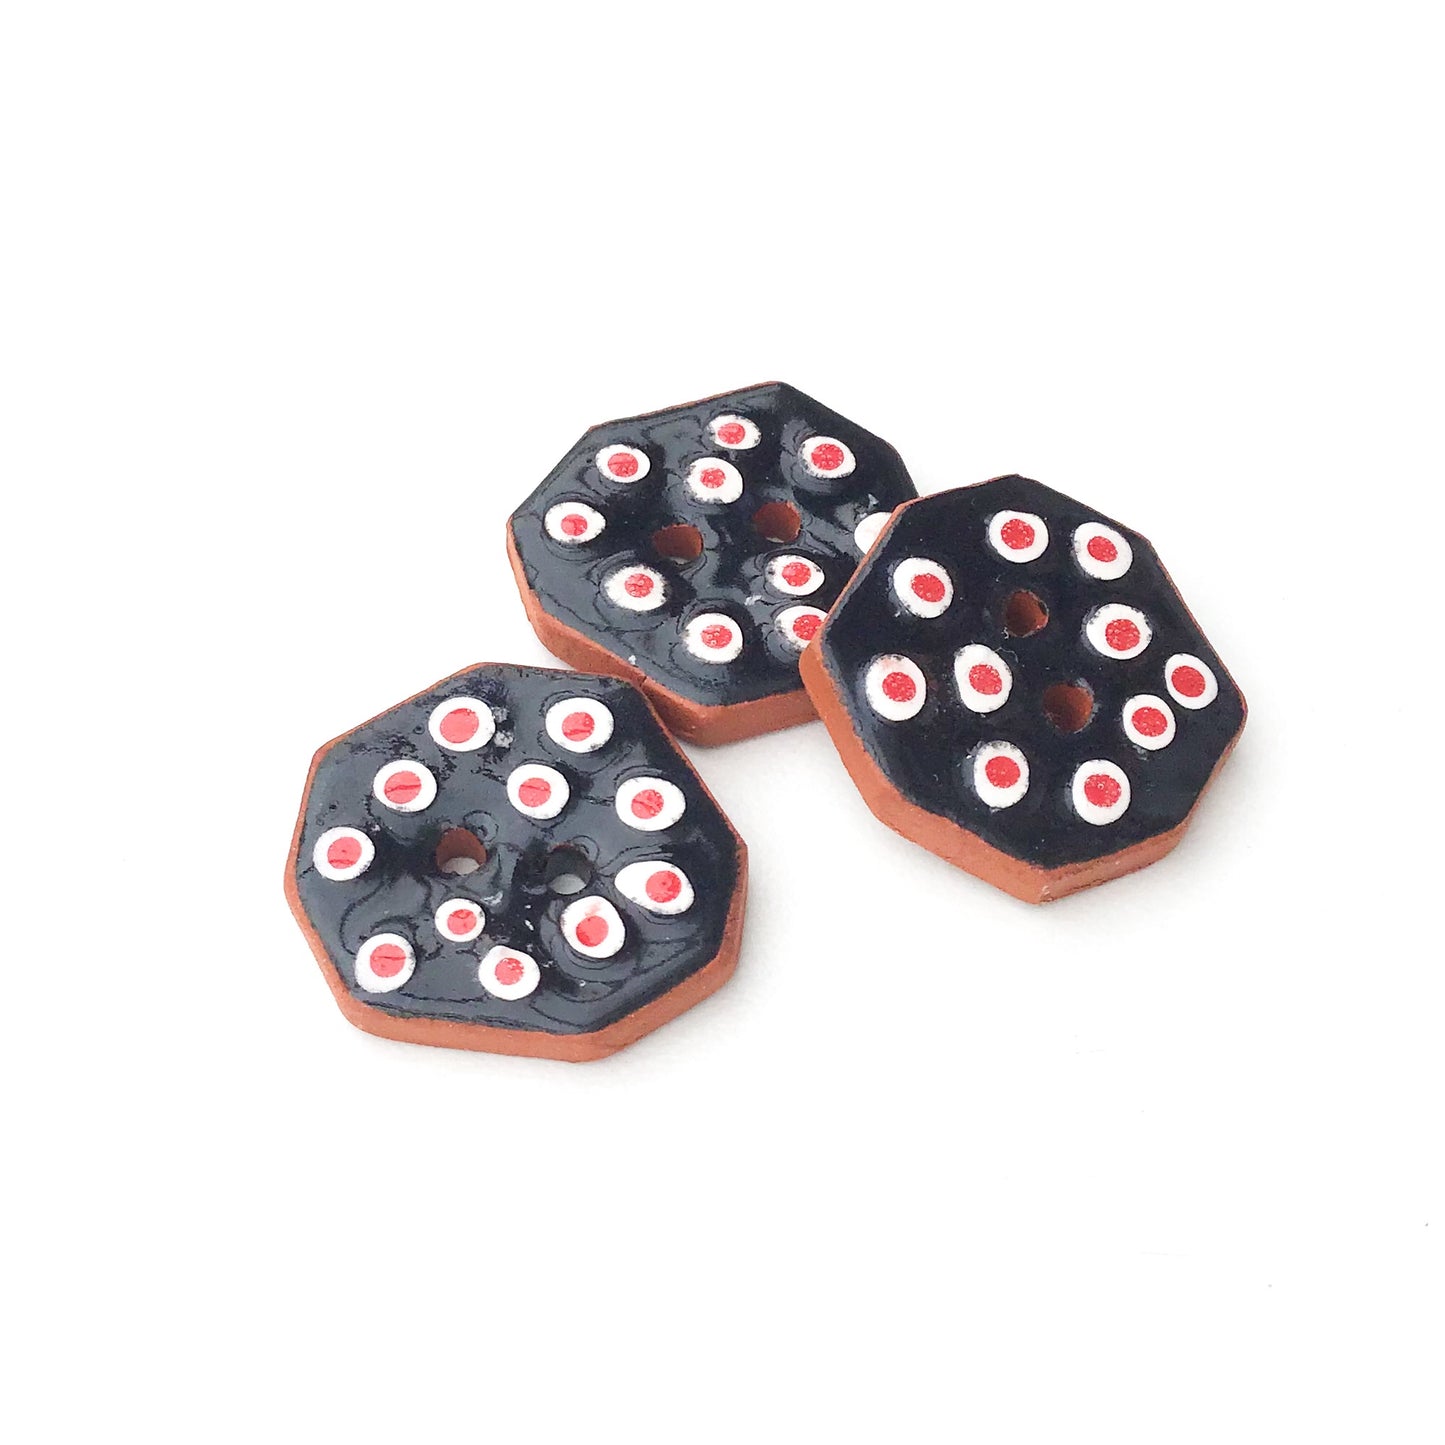 Geometric Buttons - Black with Red & White Dots - 5/8" x 3/4" - 3 Pack